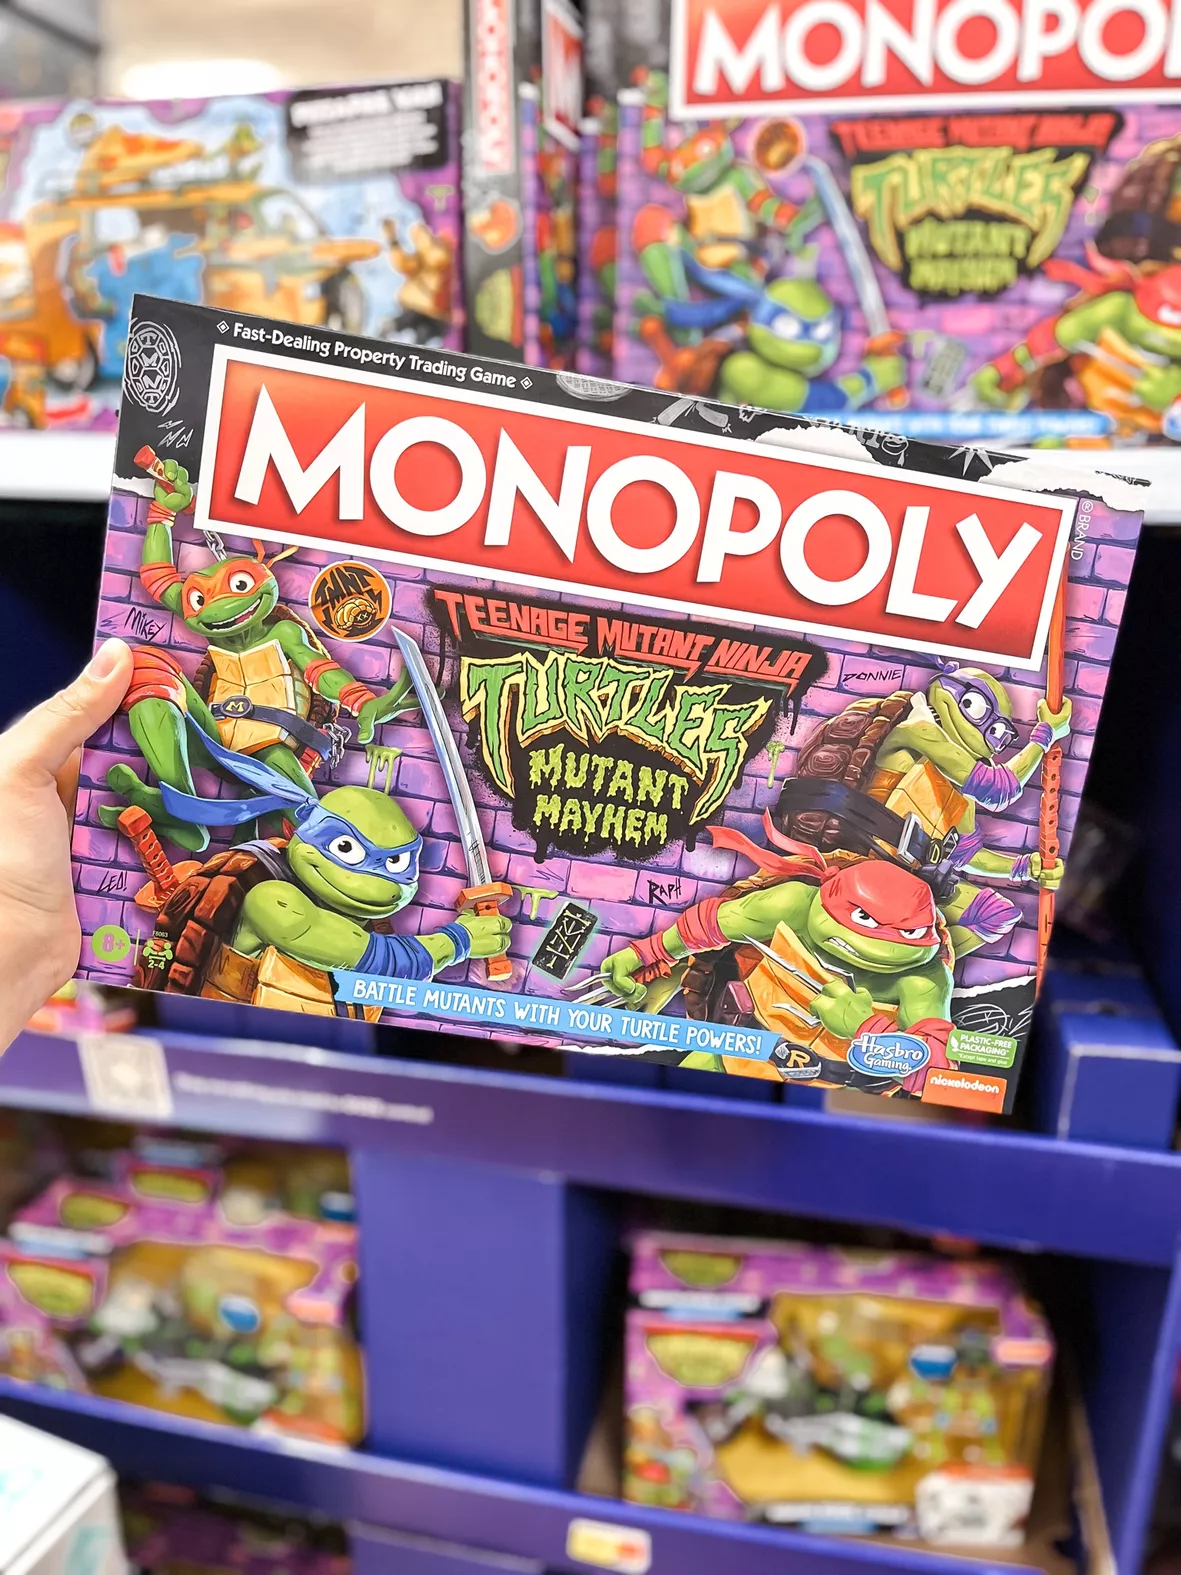 Monopoly Teenage Mutant Ninja Turtles Board Game for Kids and Family Ages 8  and Up, 2-4 Players, Only At Walmart